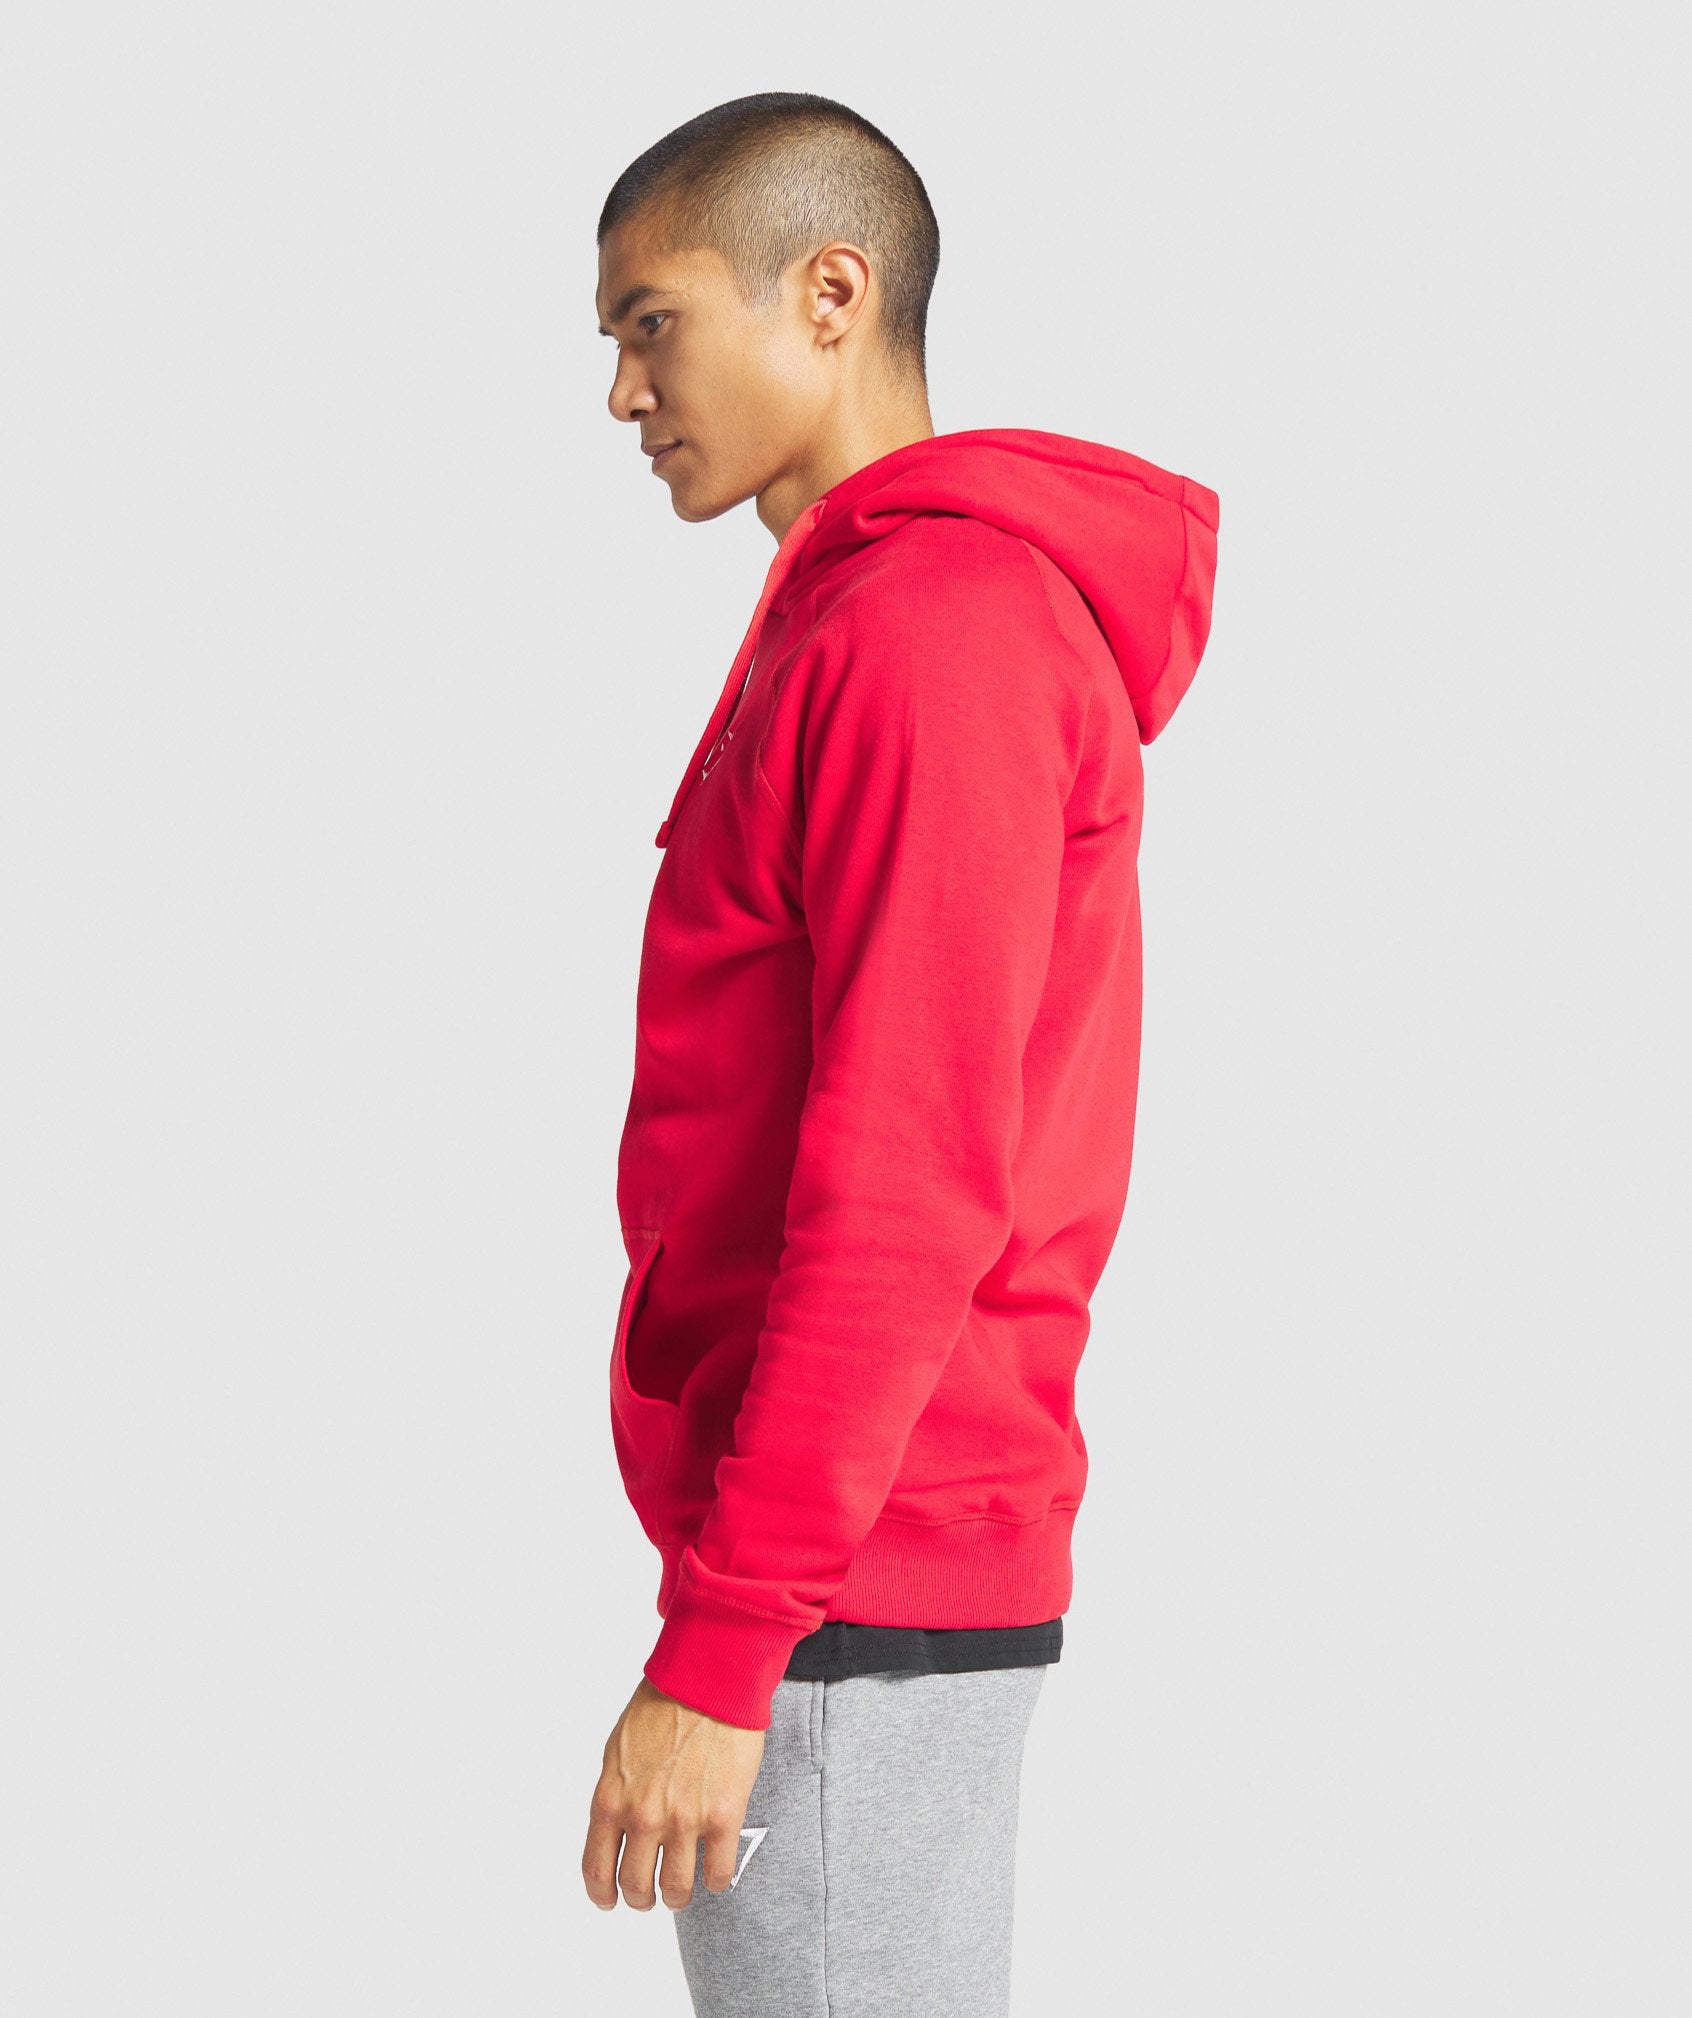 Crest Hoodie in Red - view 4